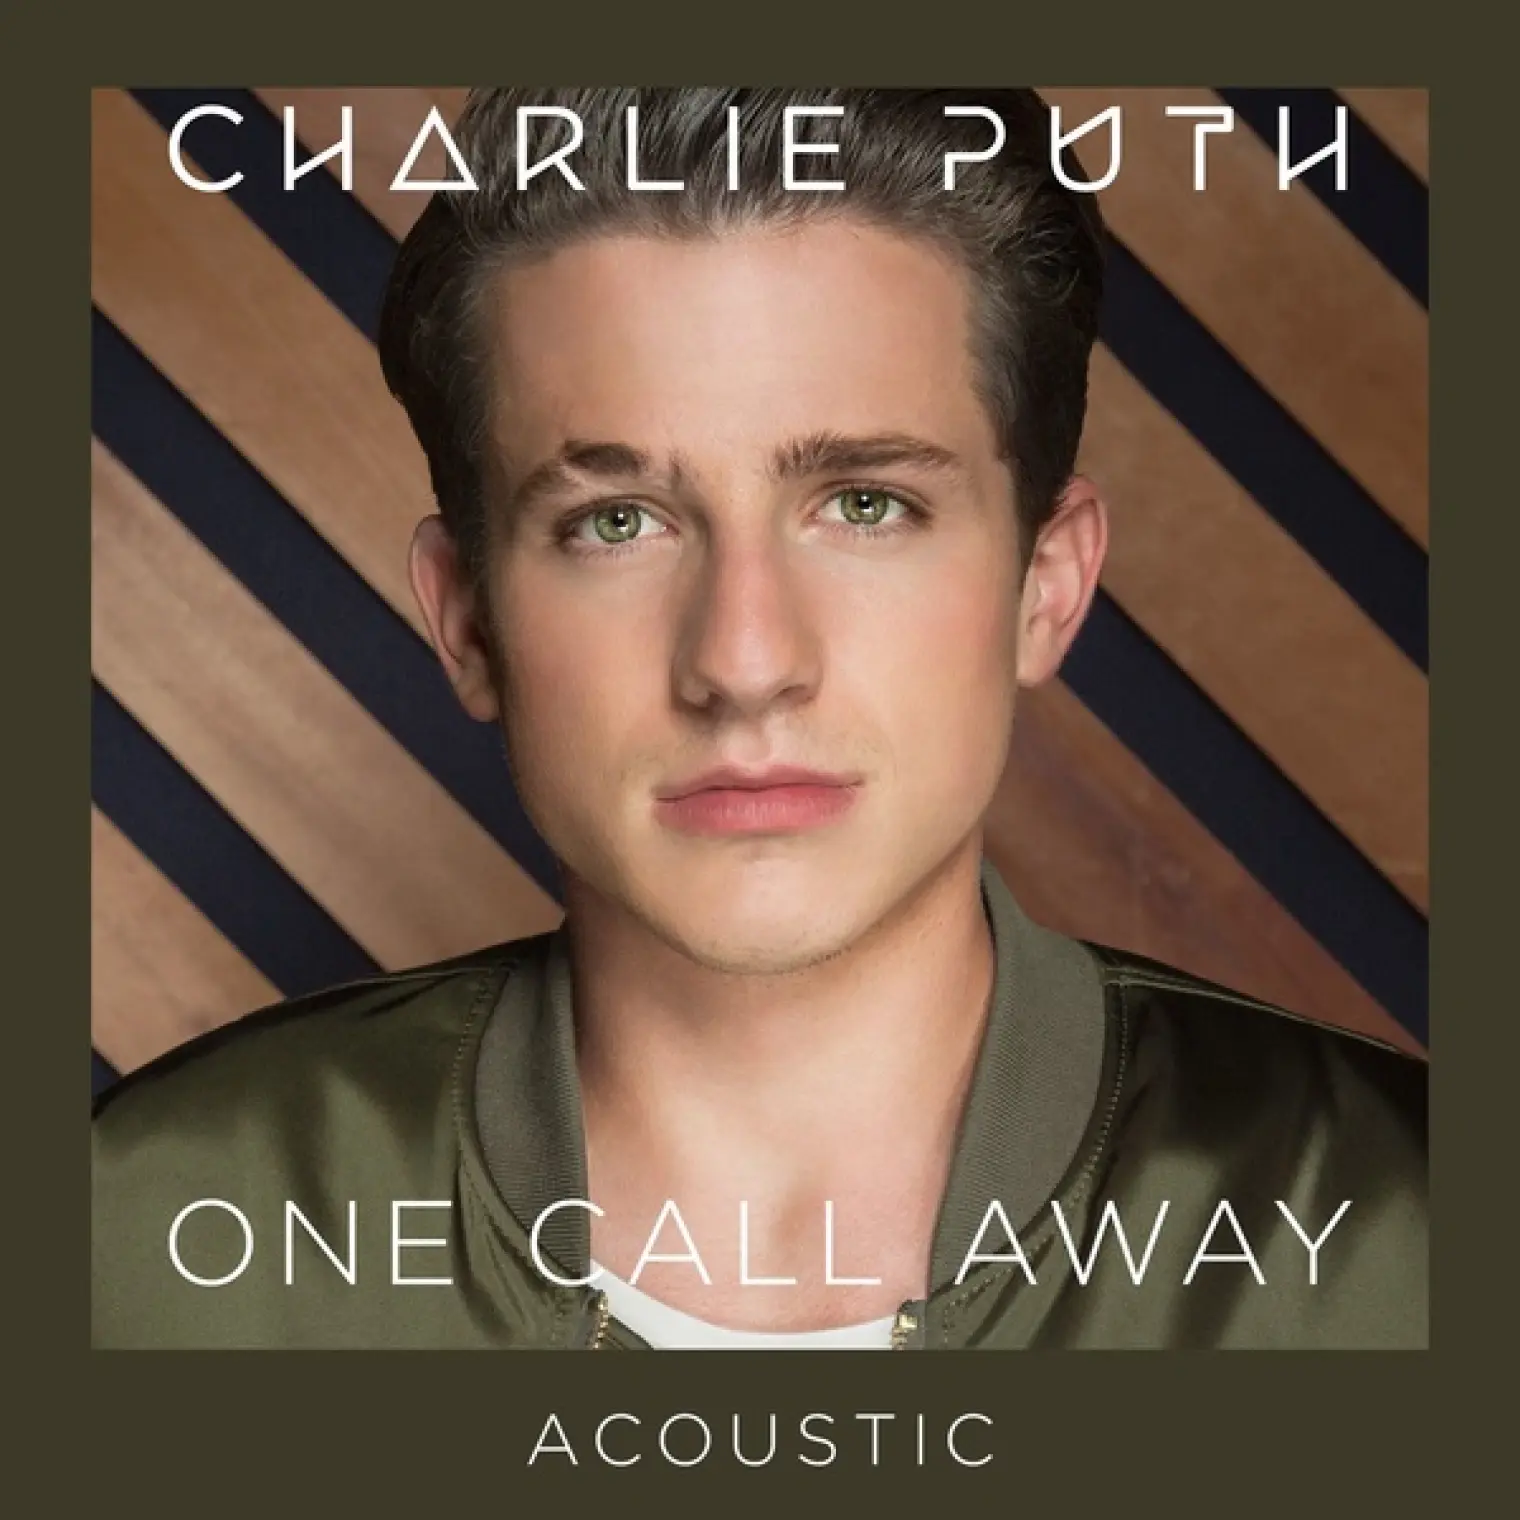 One Call Away (Acoustic) -  Charlie Puth 